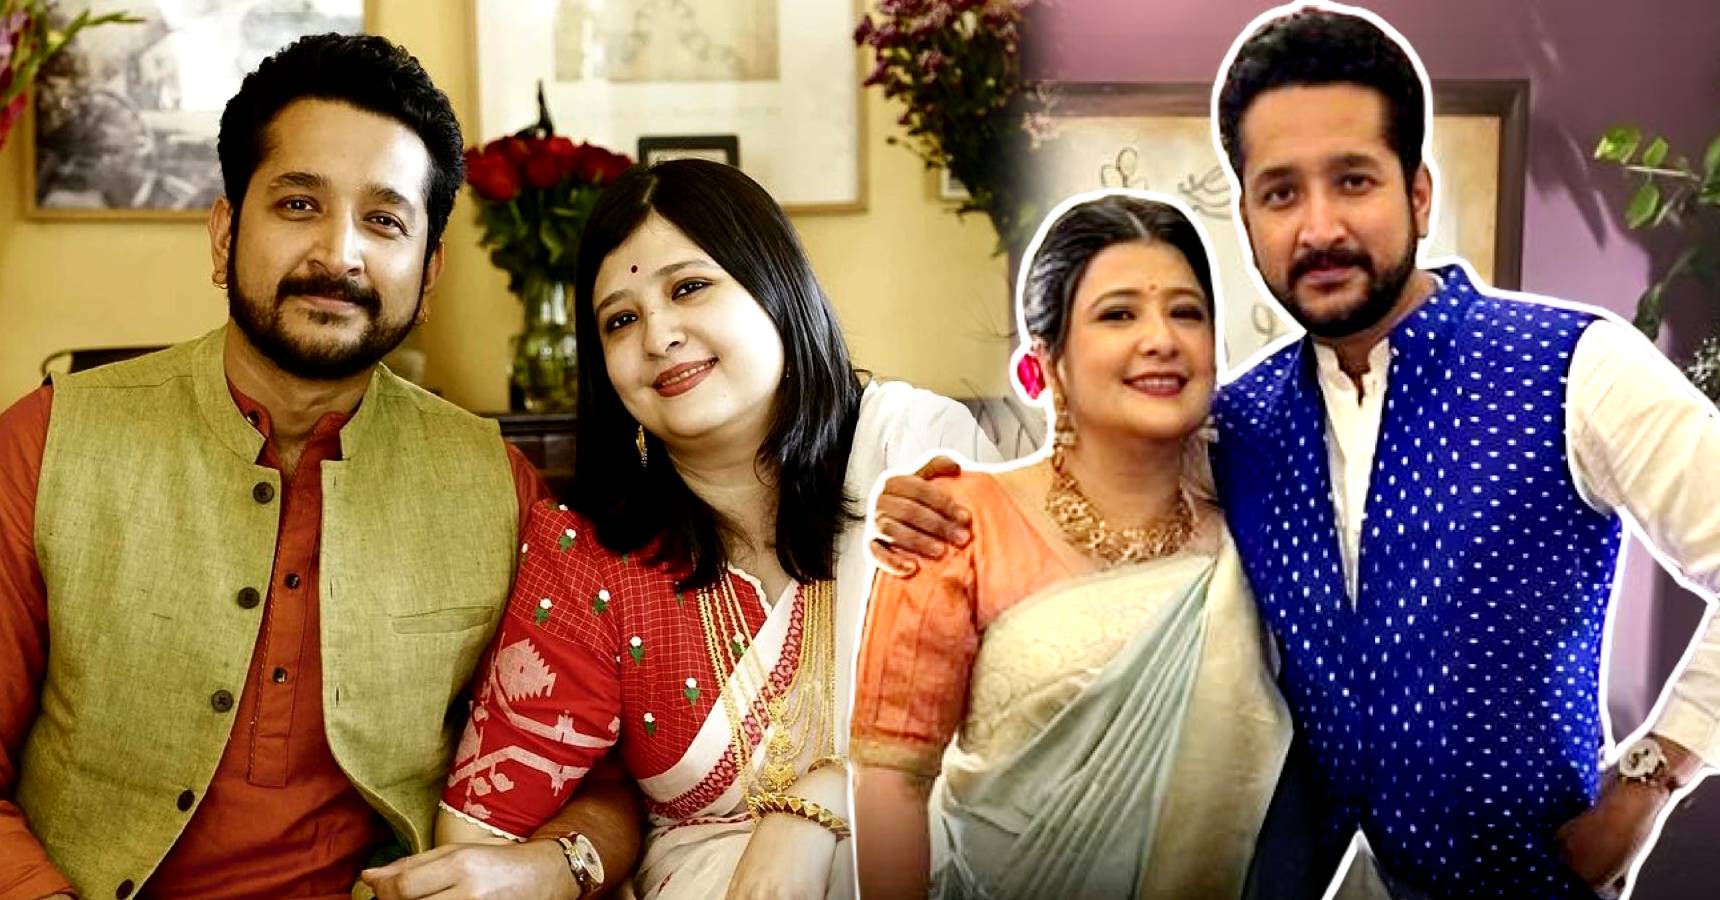 Parambrata Chatterjee wife Piya Chakraborty to undergo a surgery day after marriage